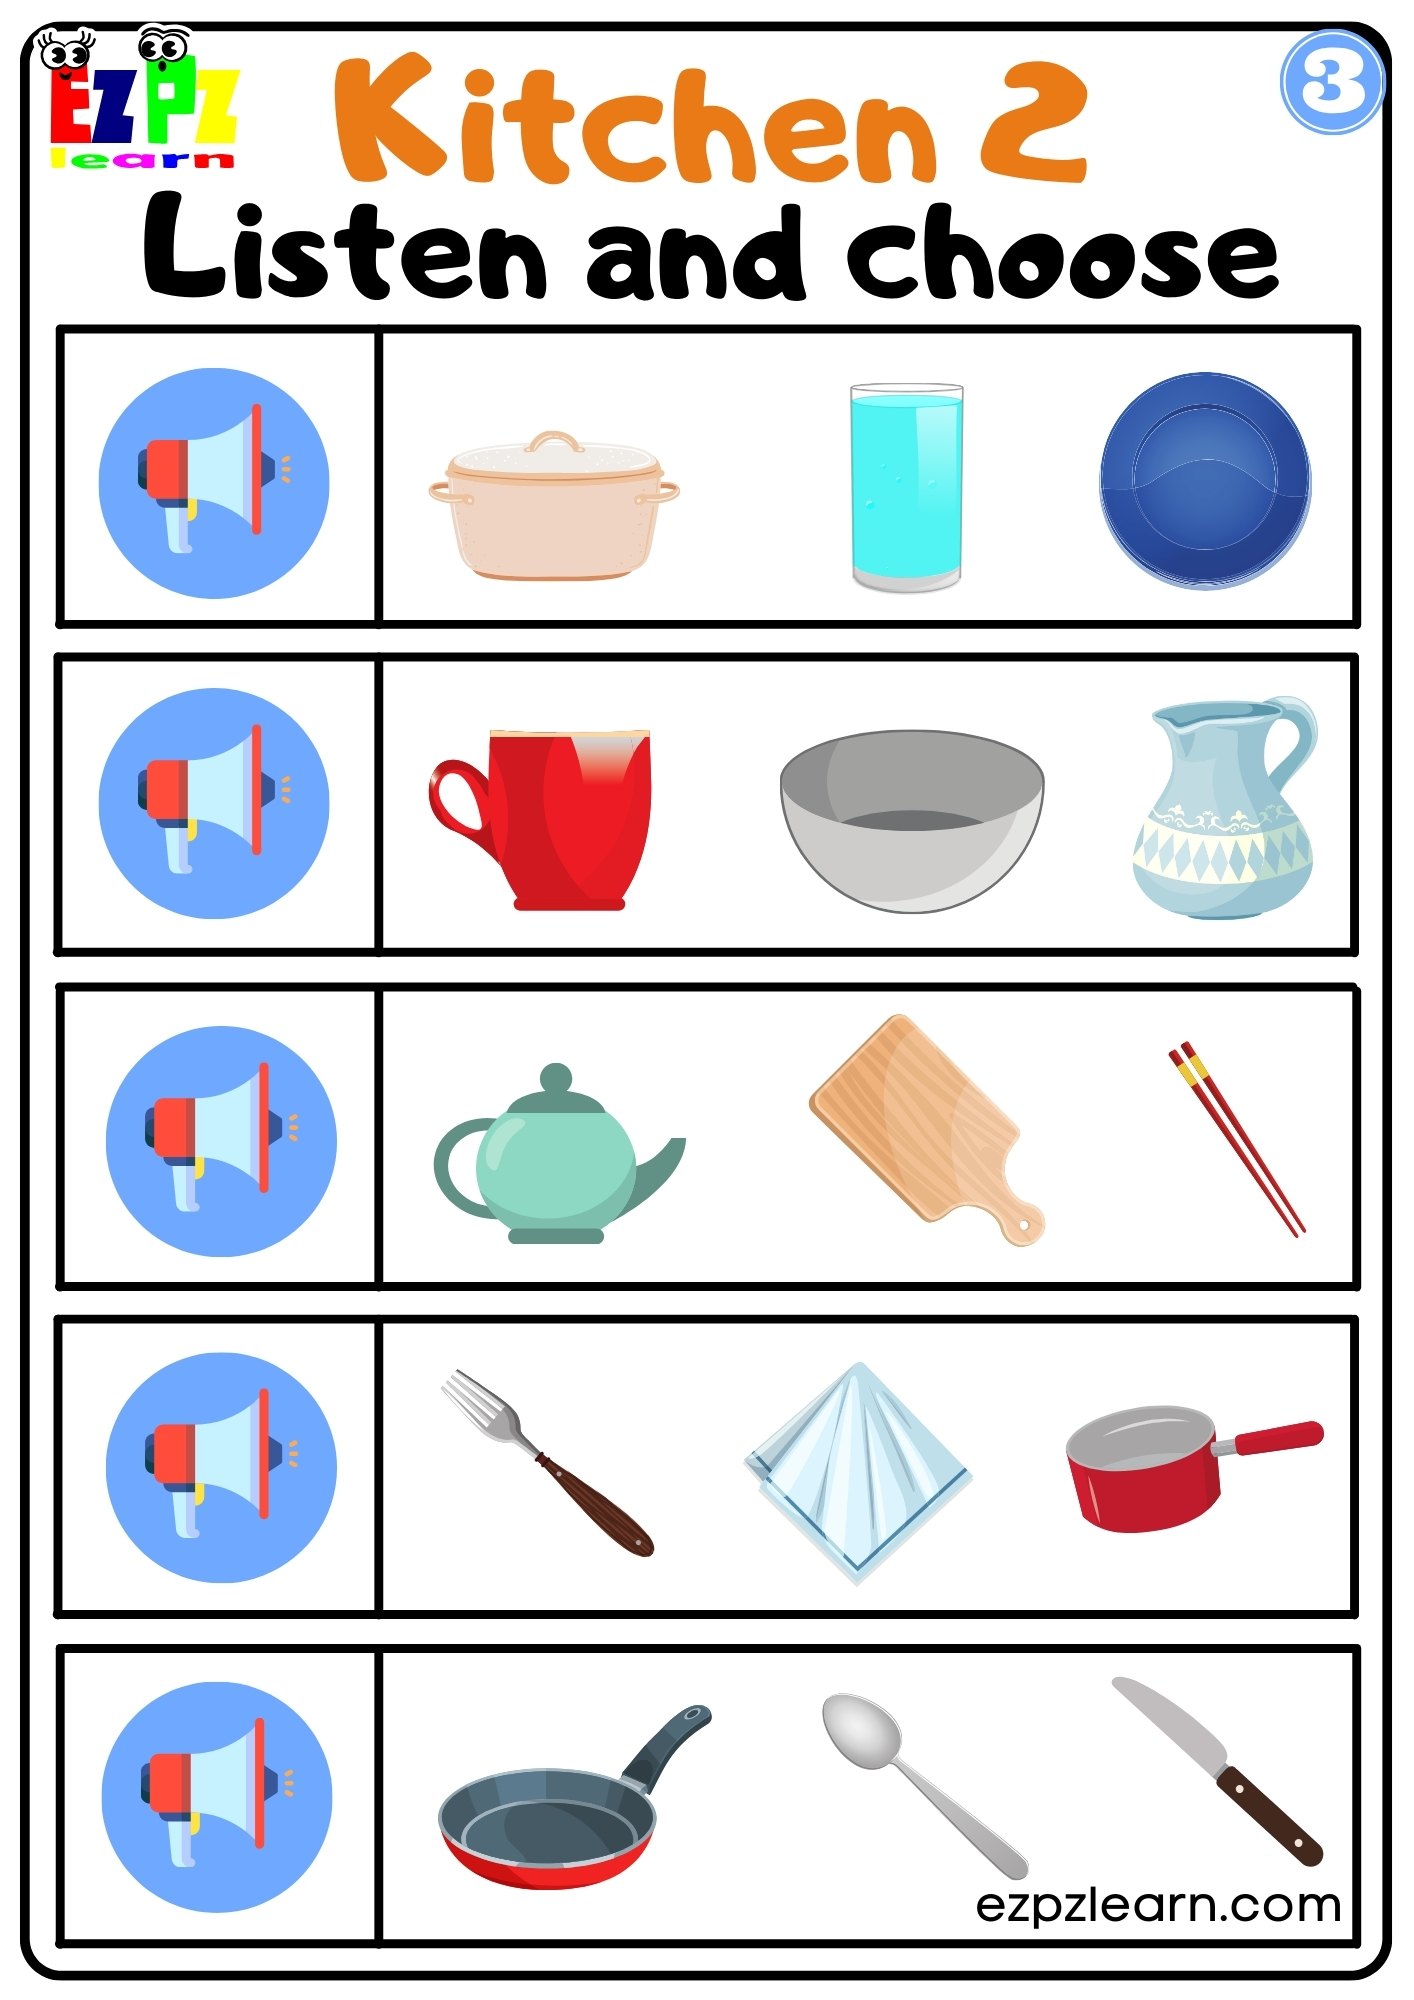 Household Items Vocabulary For Kids